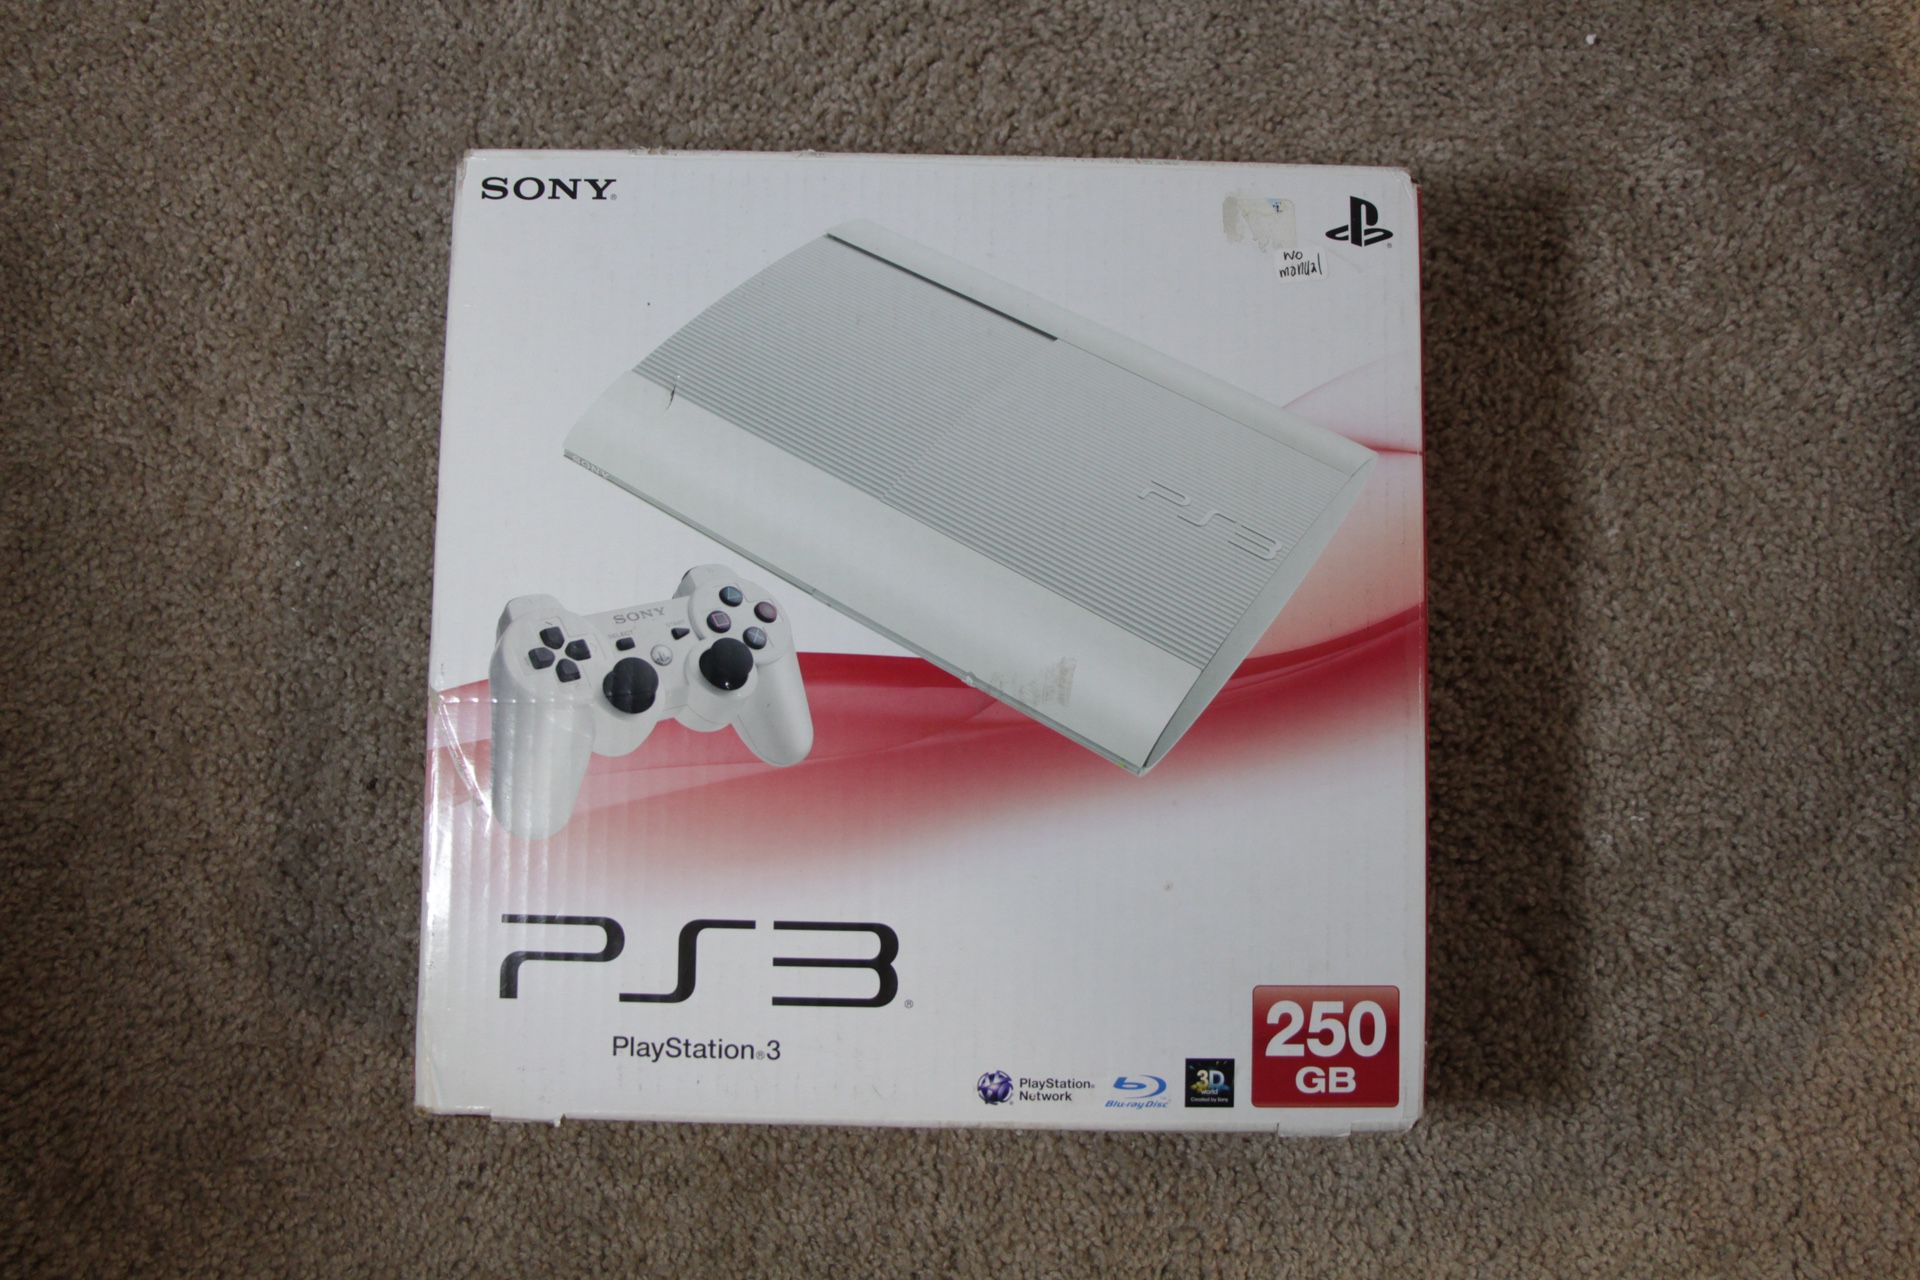 PS3 Classic White 250GB Console (PlayStation Super Slim) Great Condition w/Box and Games 